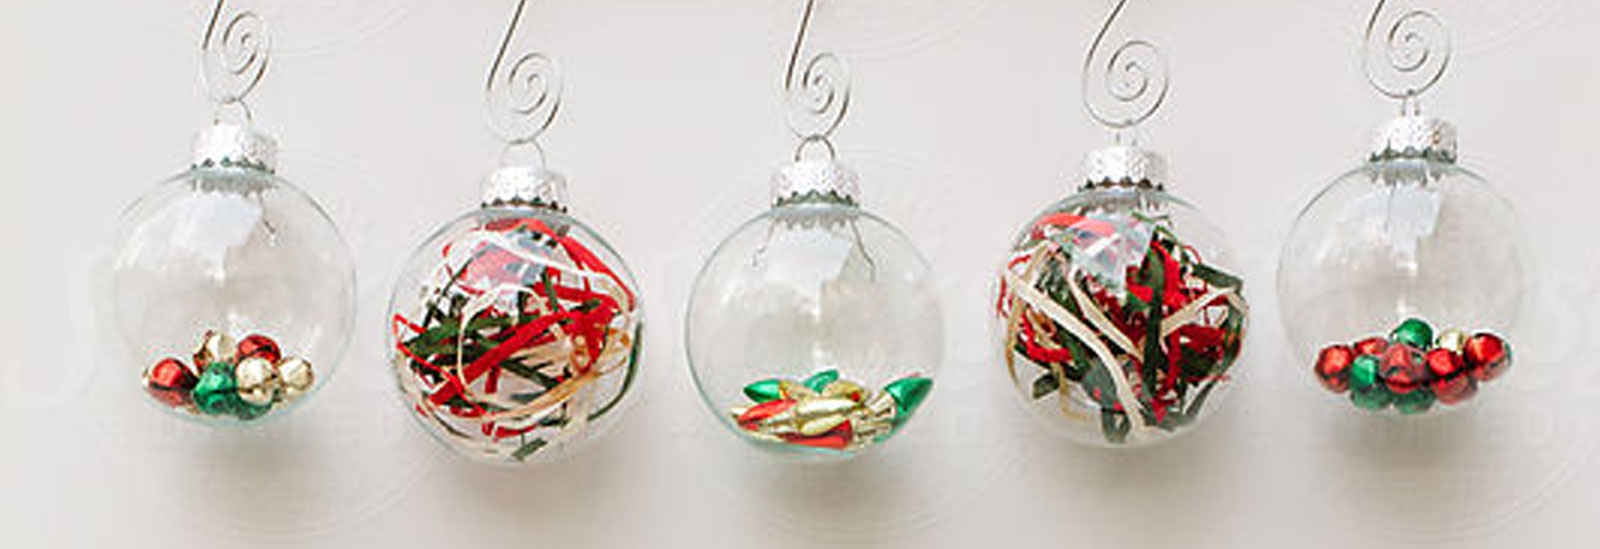 Clear Christmas ornaments hanging